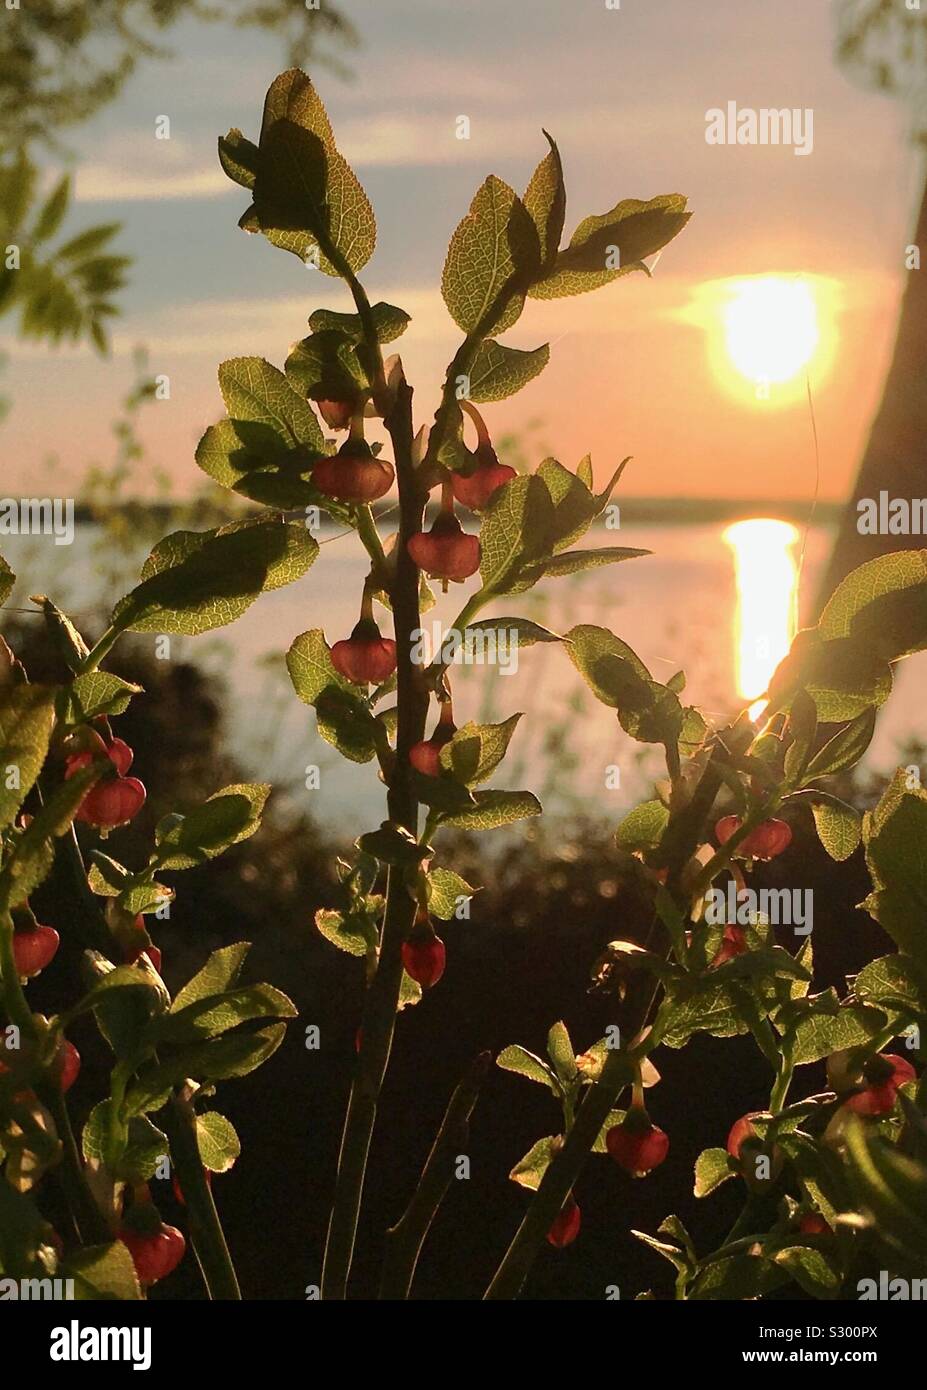 Into the midnight sun: lingonberry flowers and leaves with lake and sun in background Stock Photo